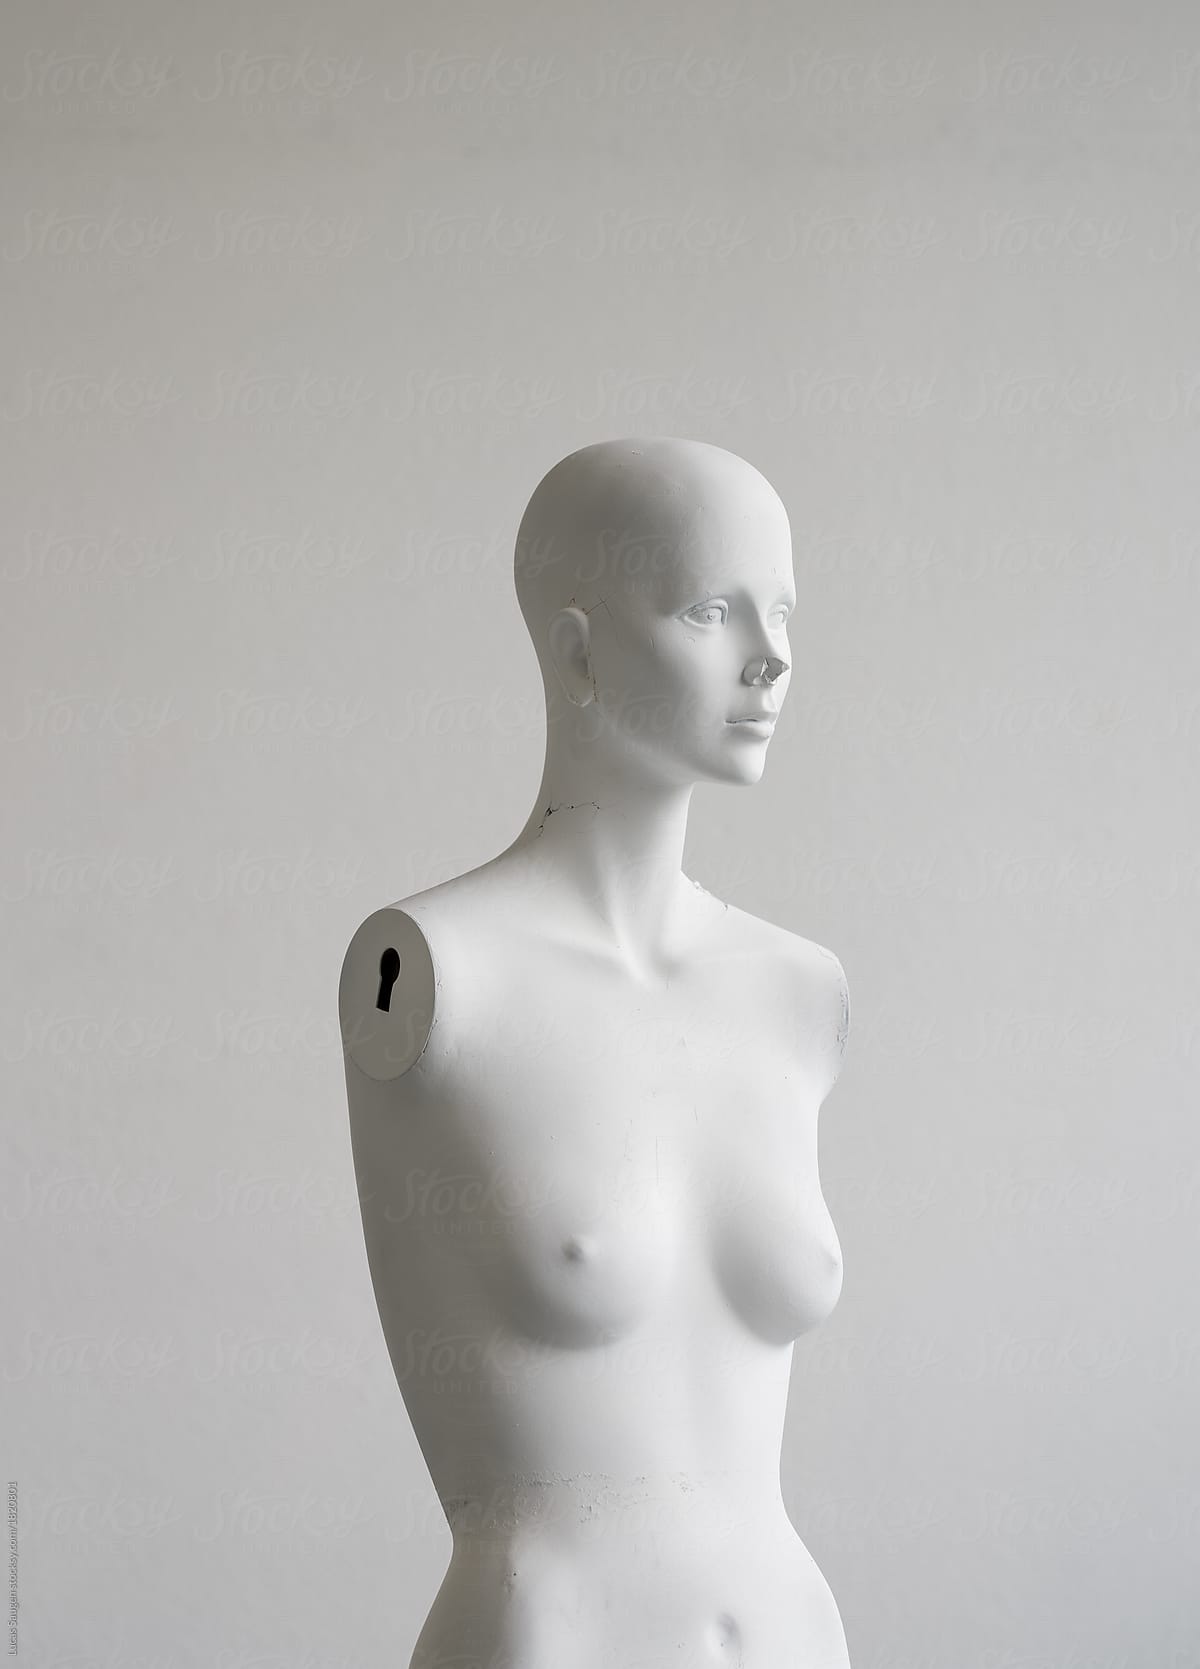 Female mannequin without hands